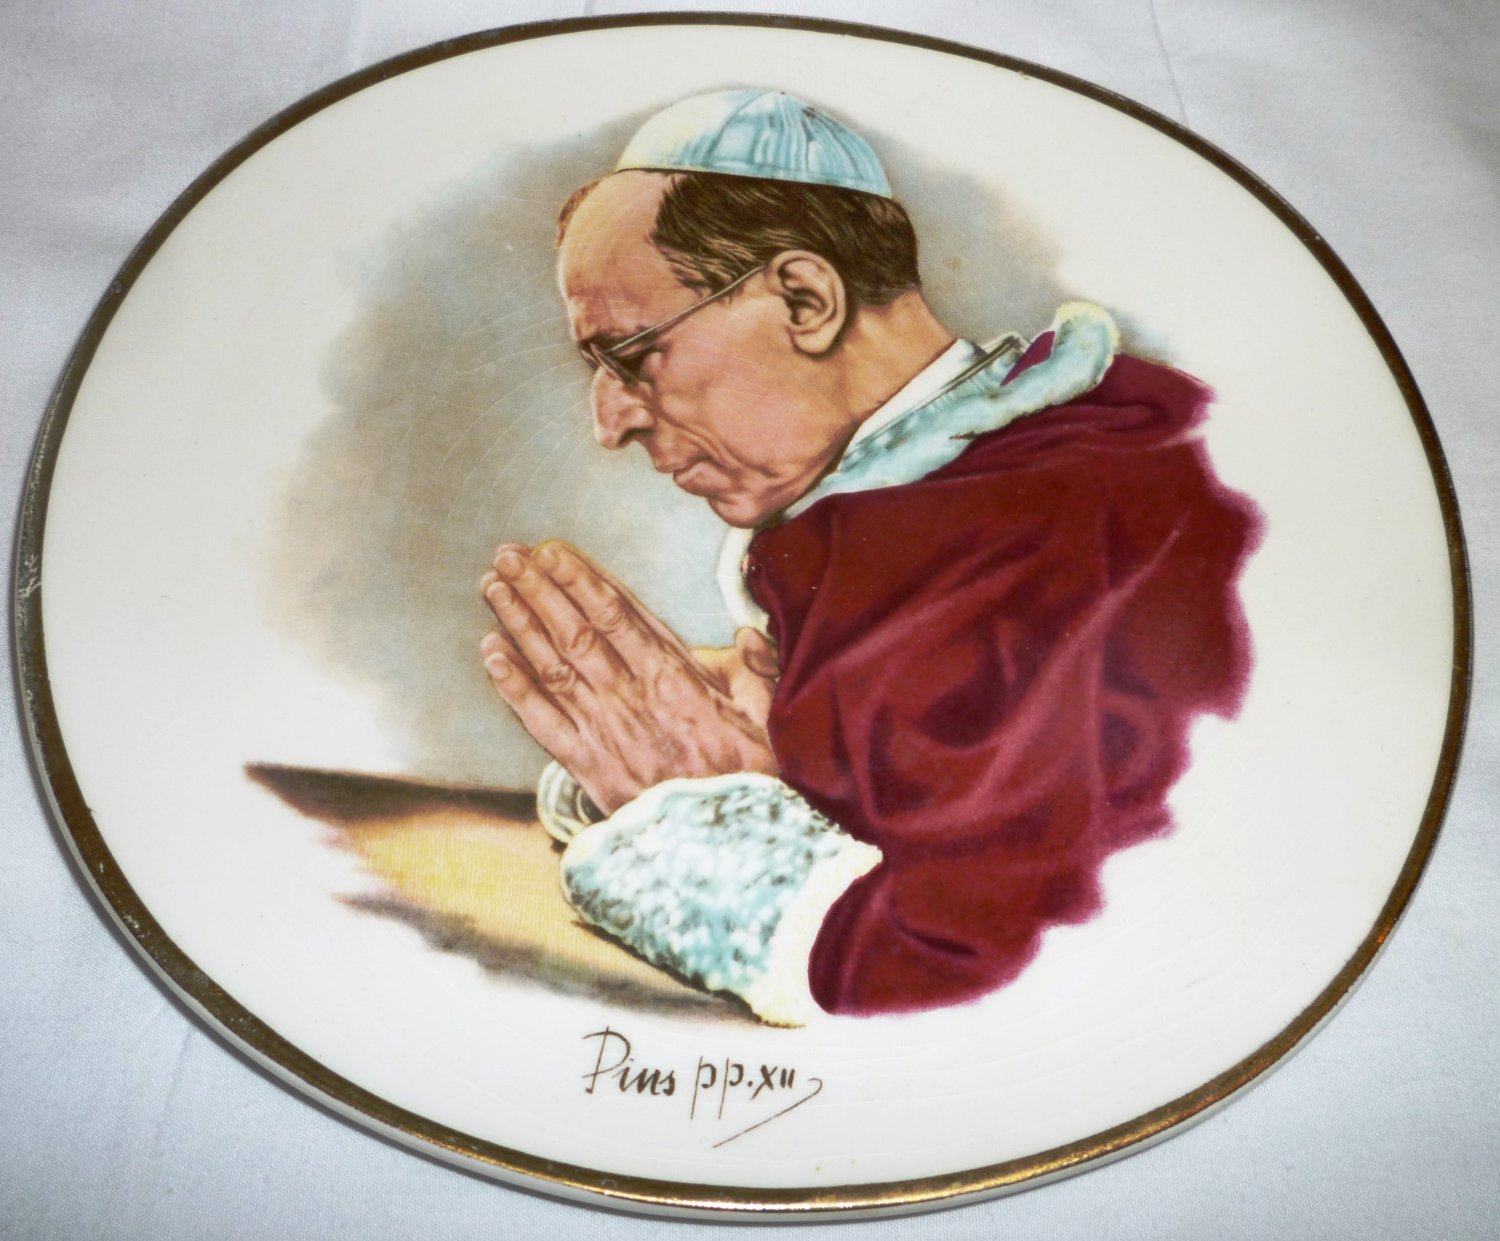 STAFFORDSHIRE PORCELAIN ENGLAND DECORATIVE PLATE POPE PIUS XII CROWN CLARENCE RR